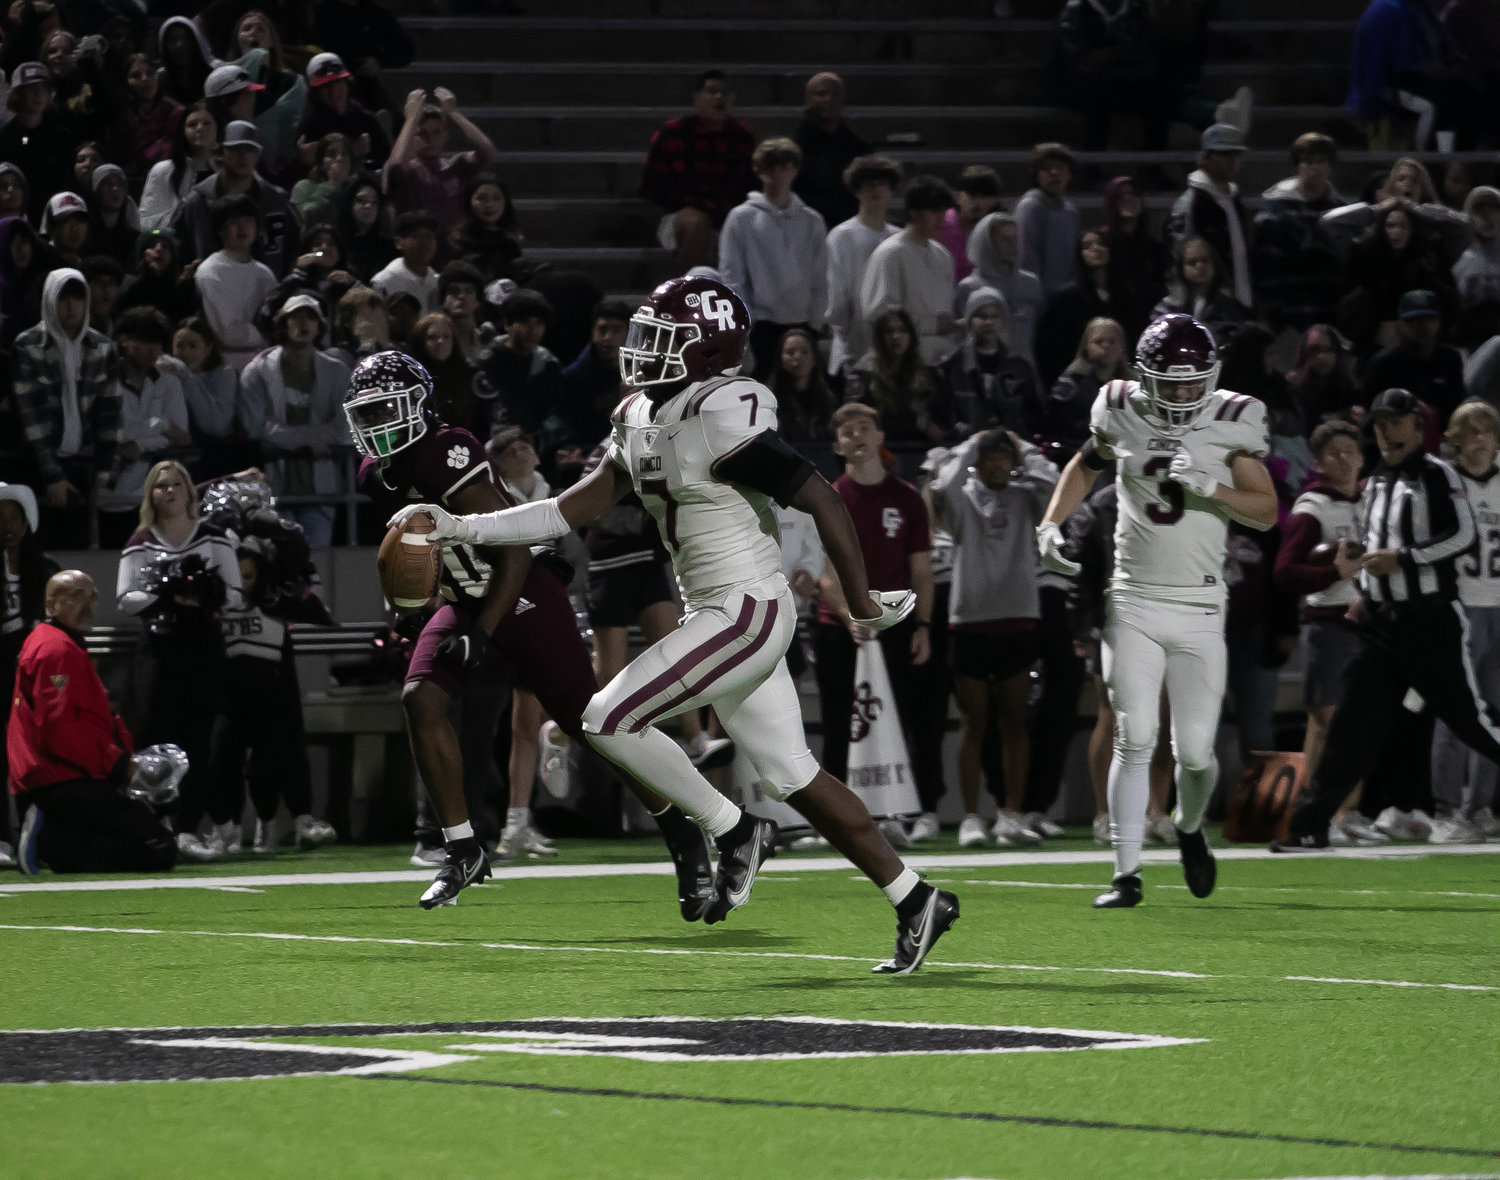 Sam McKnight runs in a touchdown during Friday's Class 6A-Division I area round game between Cinco Ranch and Cy-Fair at Pridgeon Stadium.